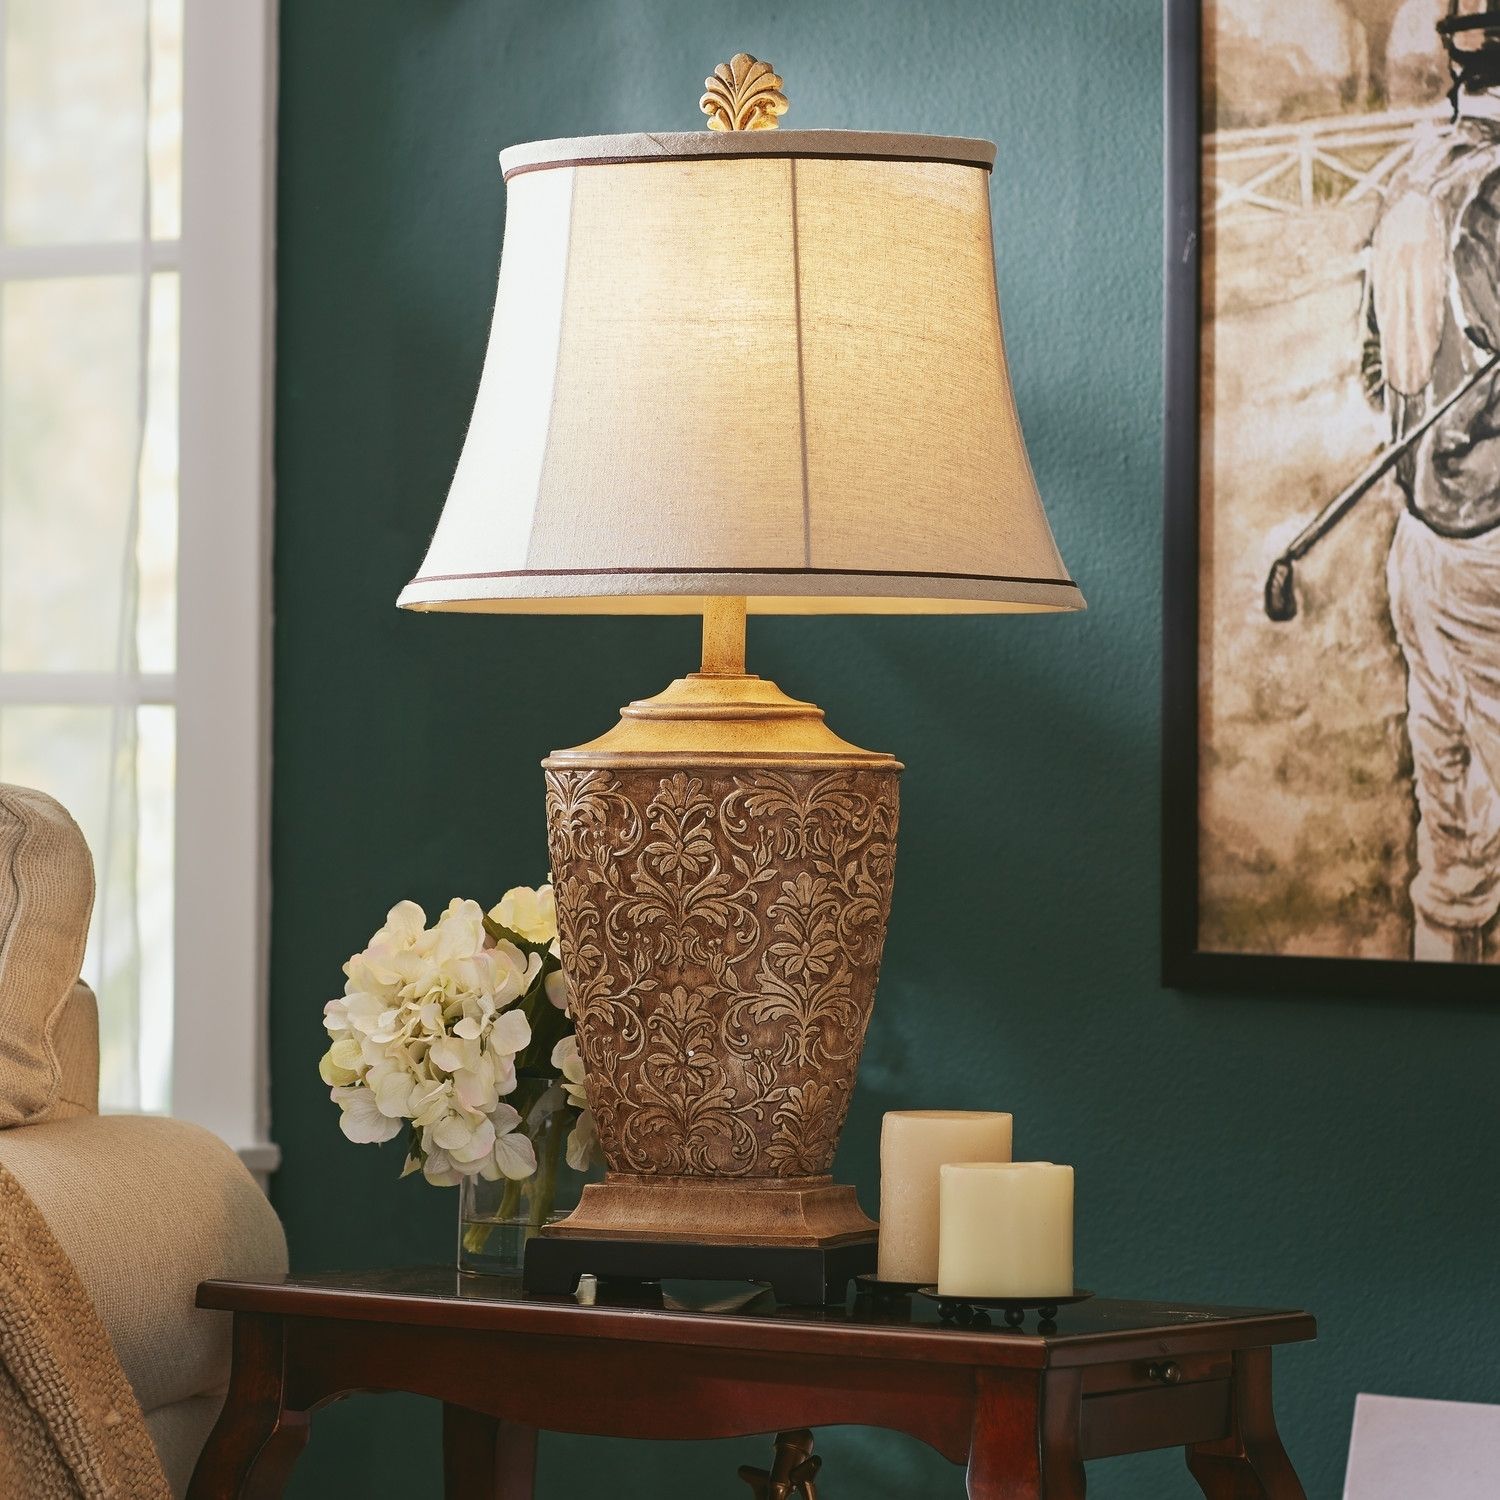 Where To Buy Floor Lamps Put Lamp In Living Room Intended For Table With Formal Living Room Table Lamps (Photo 1 of 15)